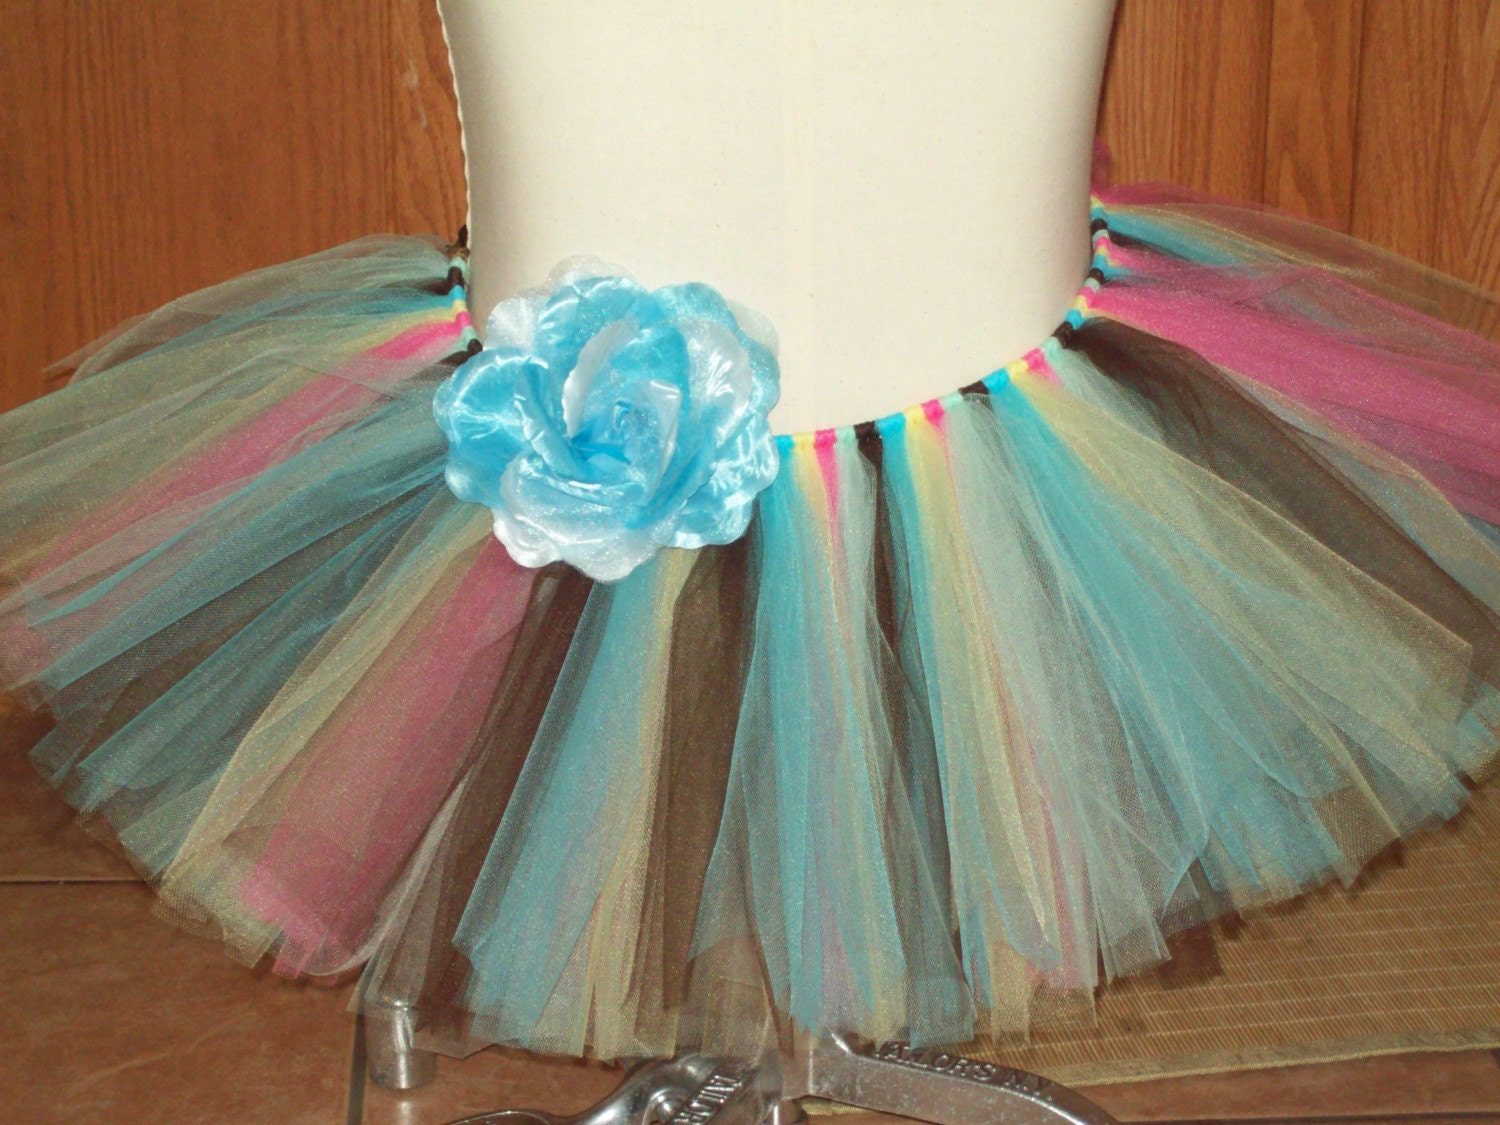 CUSTOM ORDER THE TUTU OF YOUR DREAMS GREAT FOR PHOTOGRAPHY PROPS OR PORTRAITS OR DRESS UP FAST SHIPPING